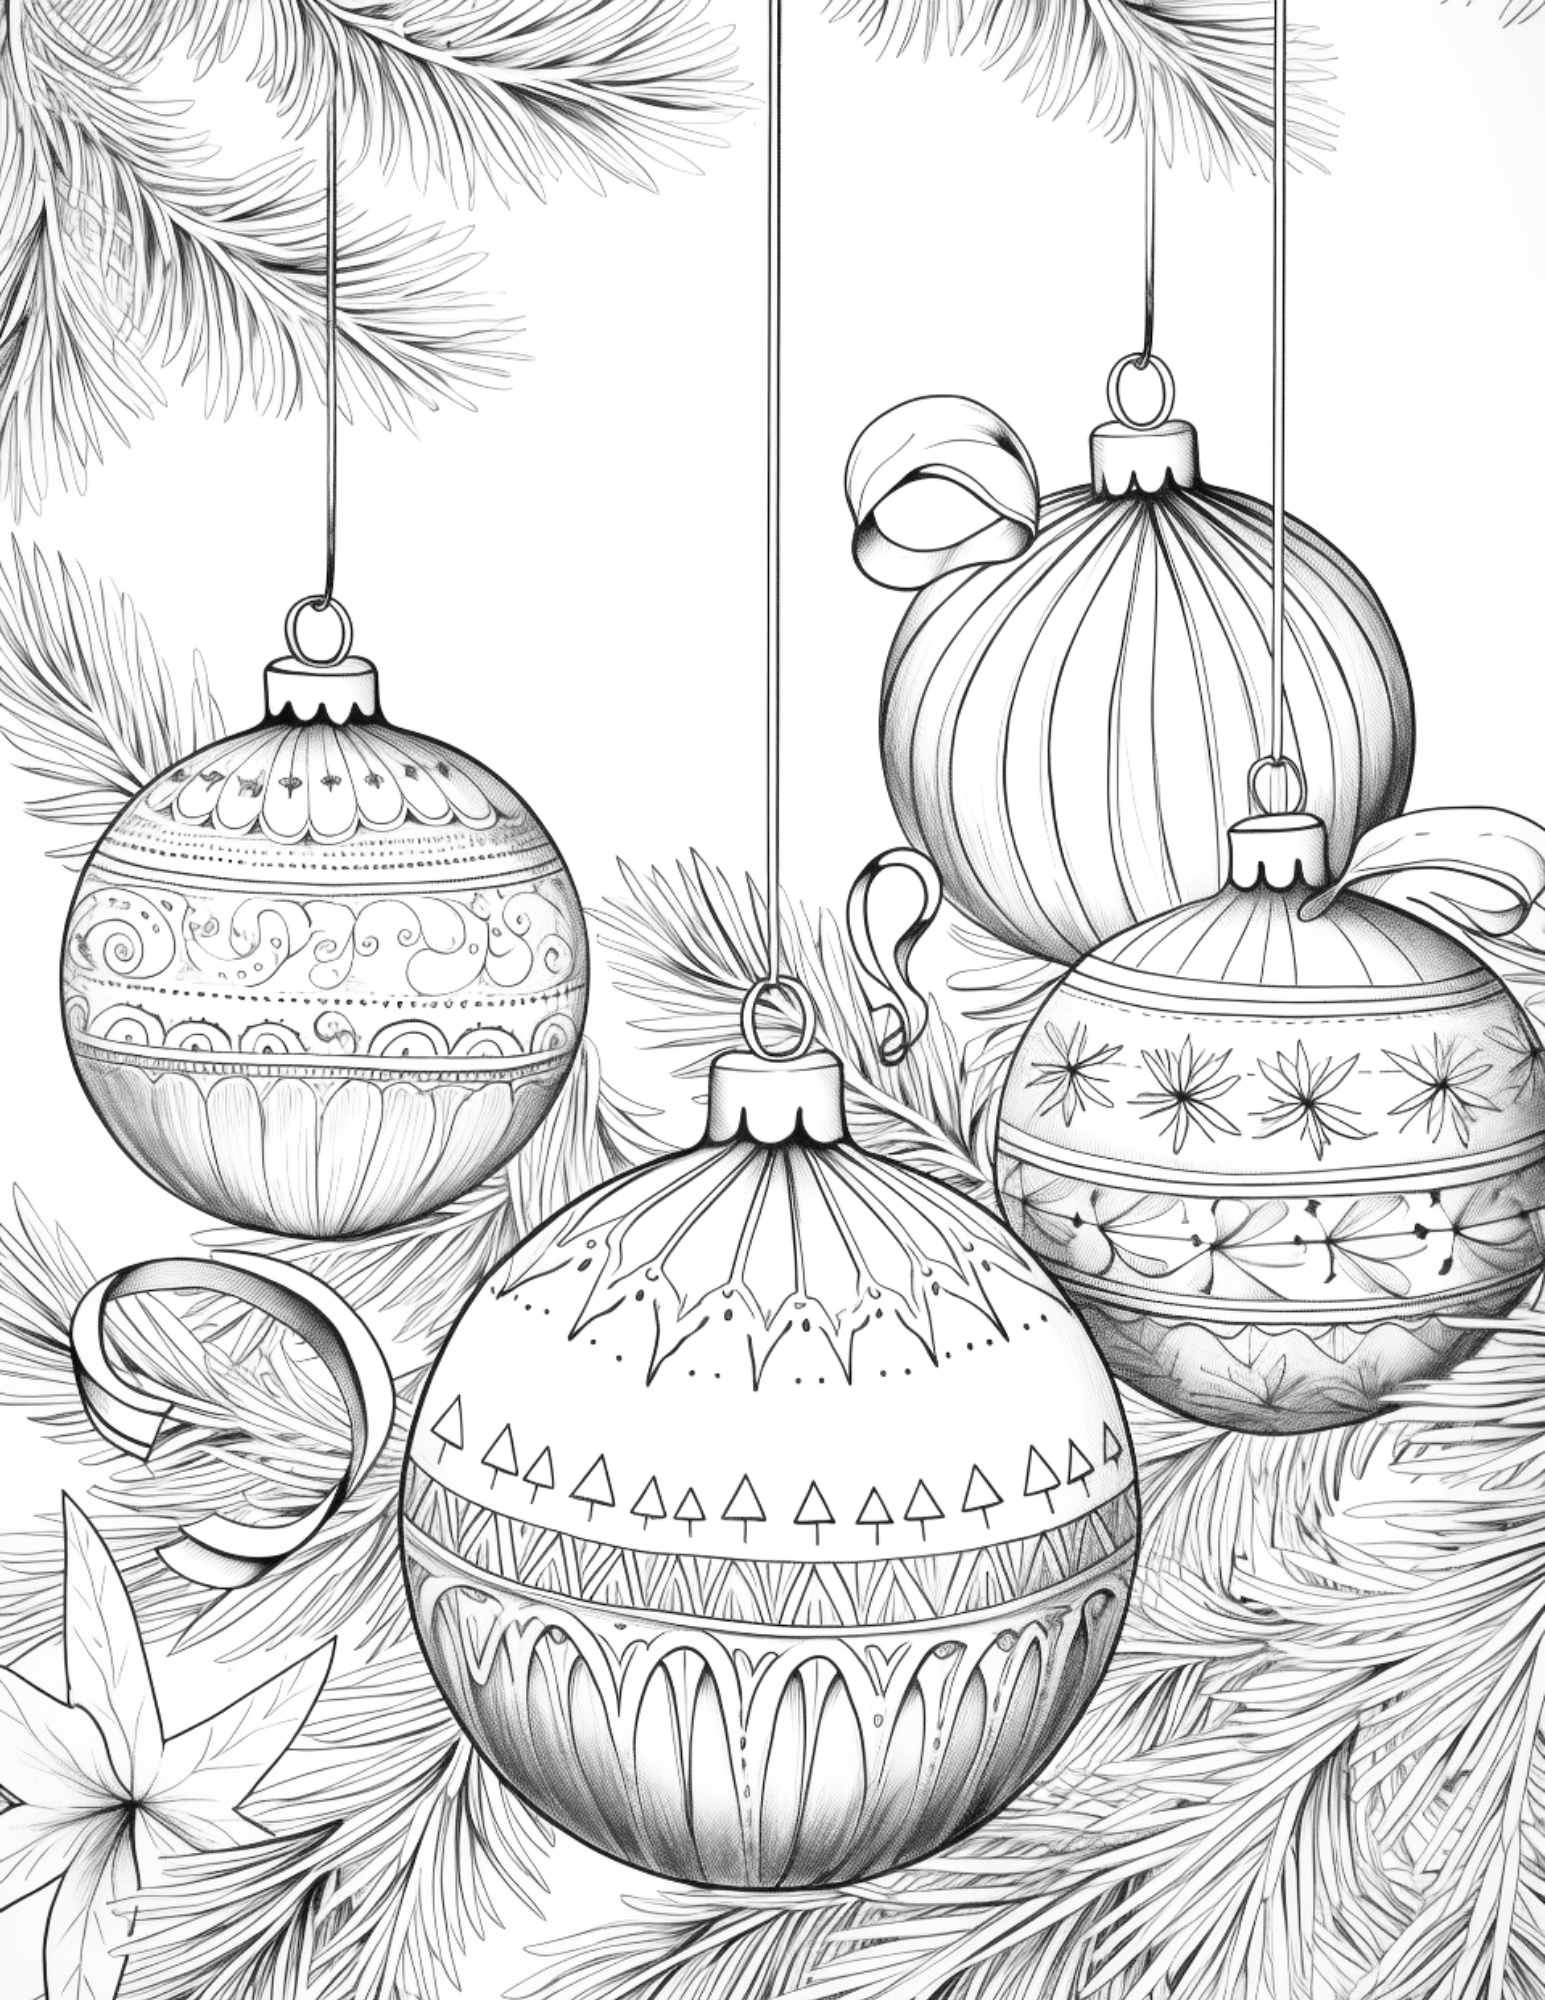 Free christmas decorations grayscale coloring pages for adults printa â coloring